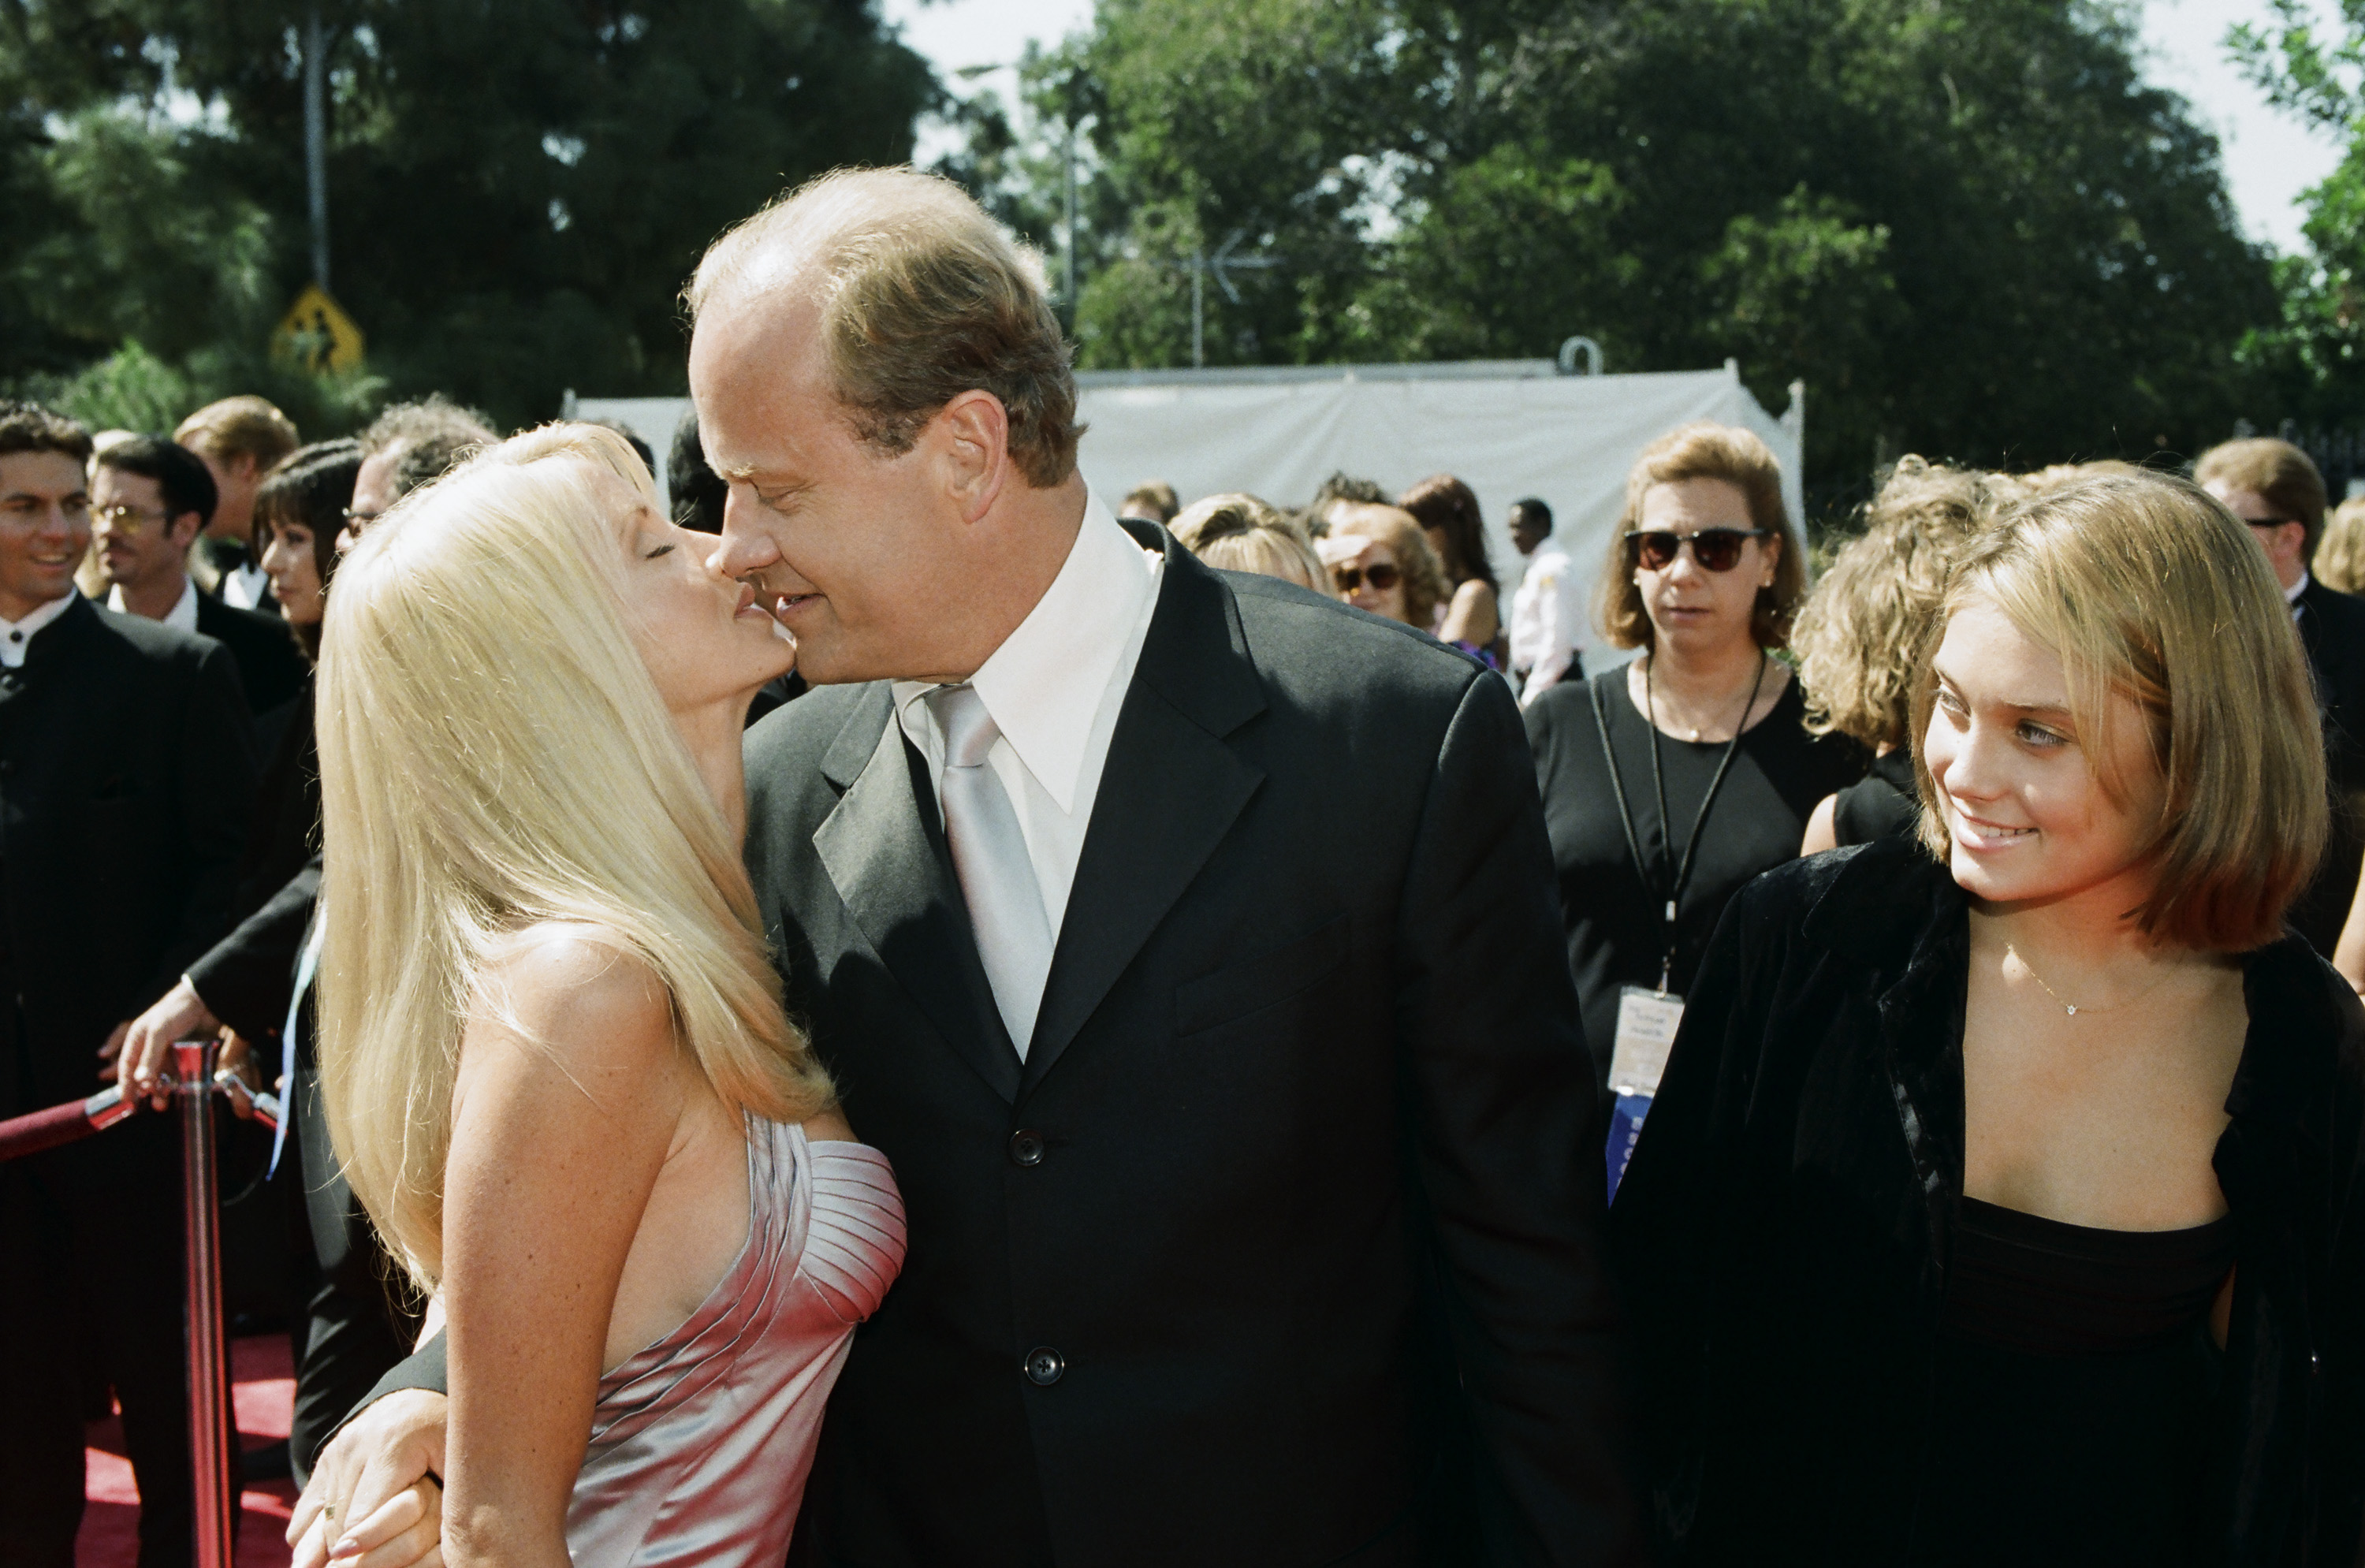 Camille Grammer, Kelsey Grammer, and Greer Grammer at the 50th Annual Primetime Emmy Awards in Los Angeles, California on September 13, 1998 | Source: Getty Images